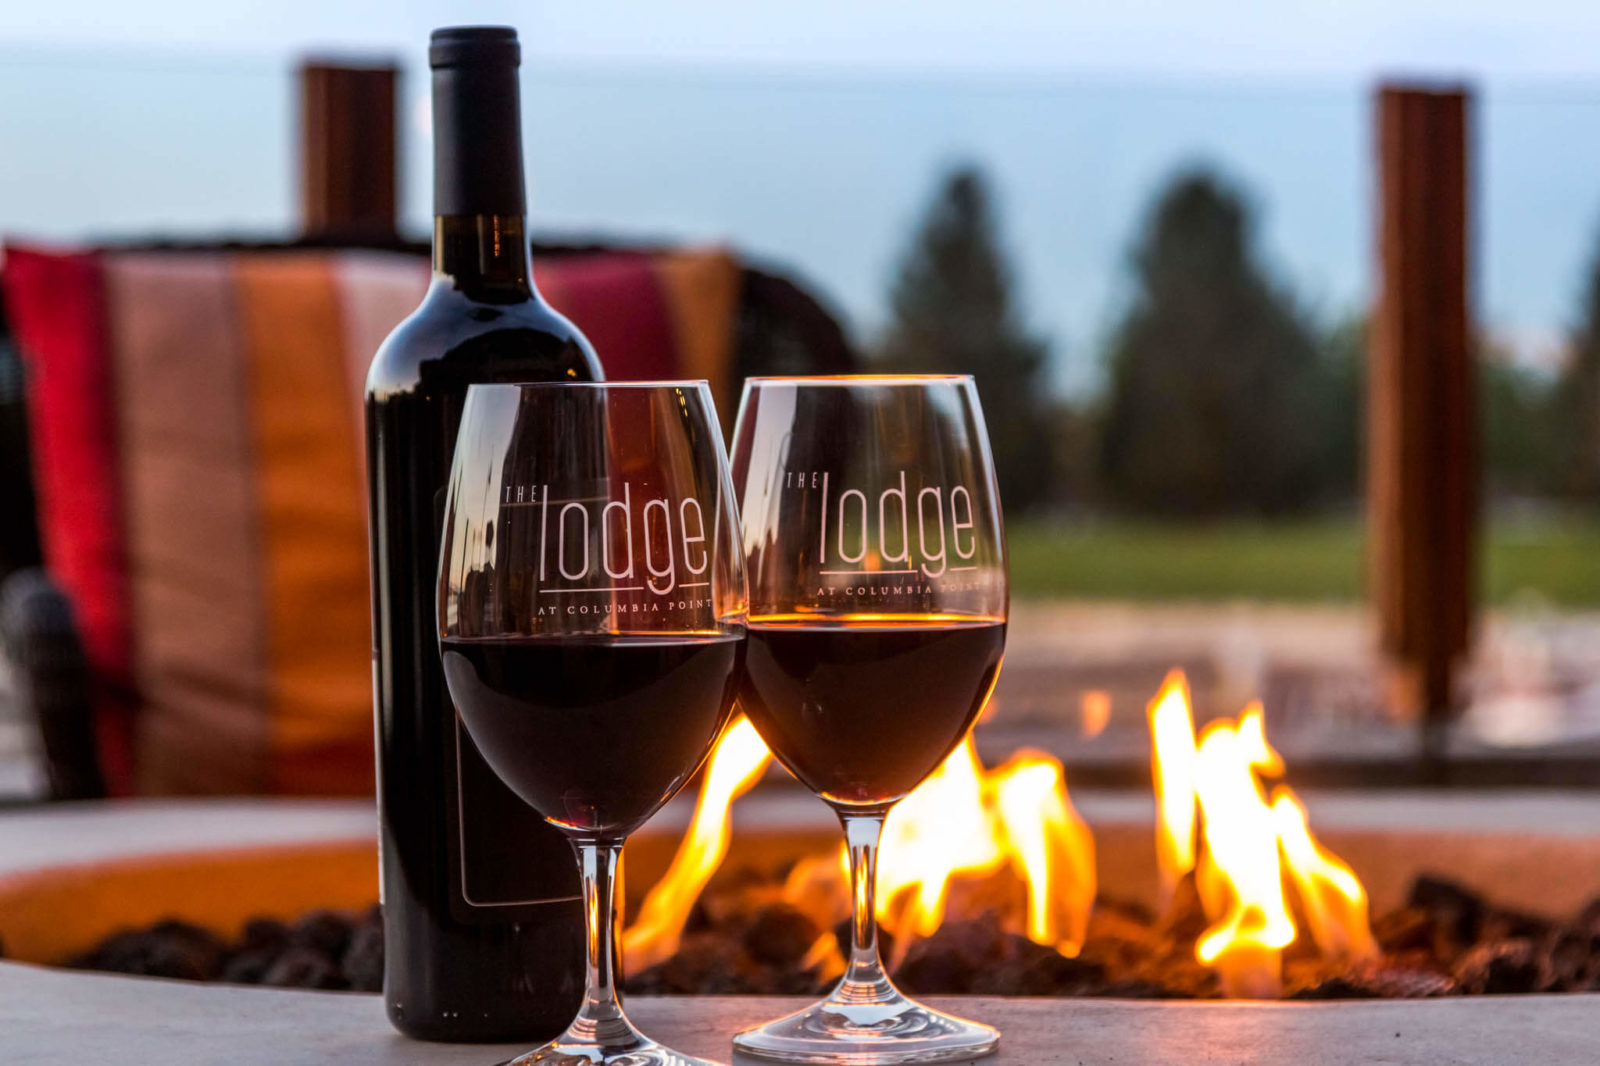 Wine by the fire-pit at the Lodge